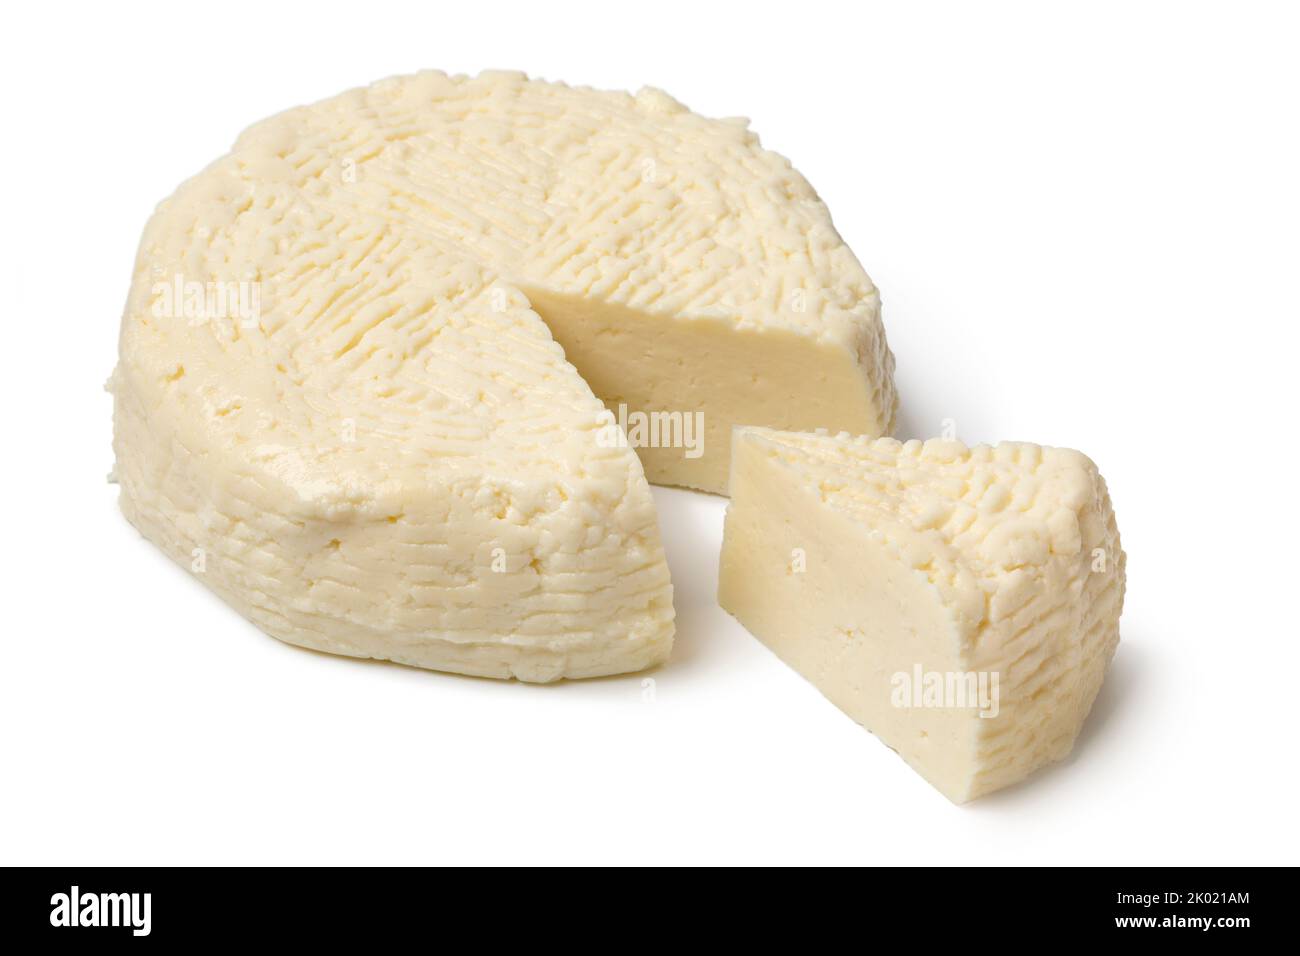 Piece of traditional Croatian homemade white cheese of cooked milk, Kuhani sirevi, isolated on white background Stock Photo